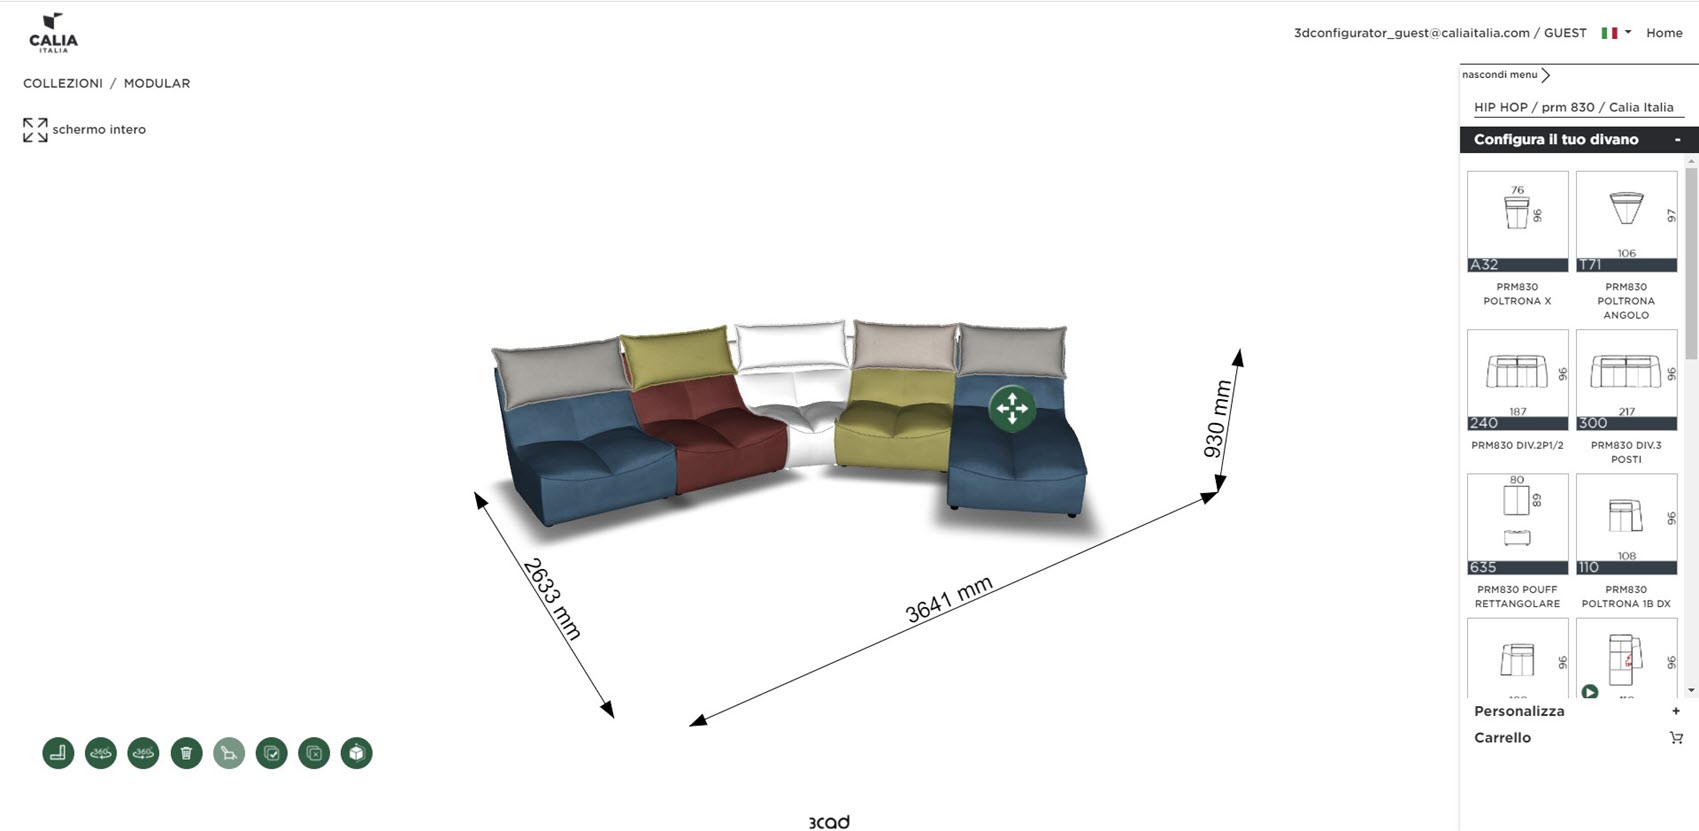 A 3D configurator interface for a modular sofa, displaying dimensions and customizable parts.